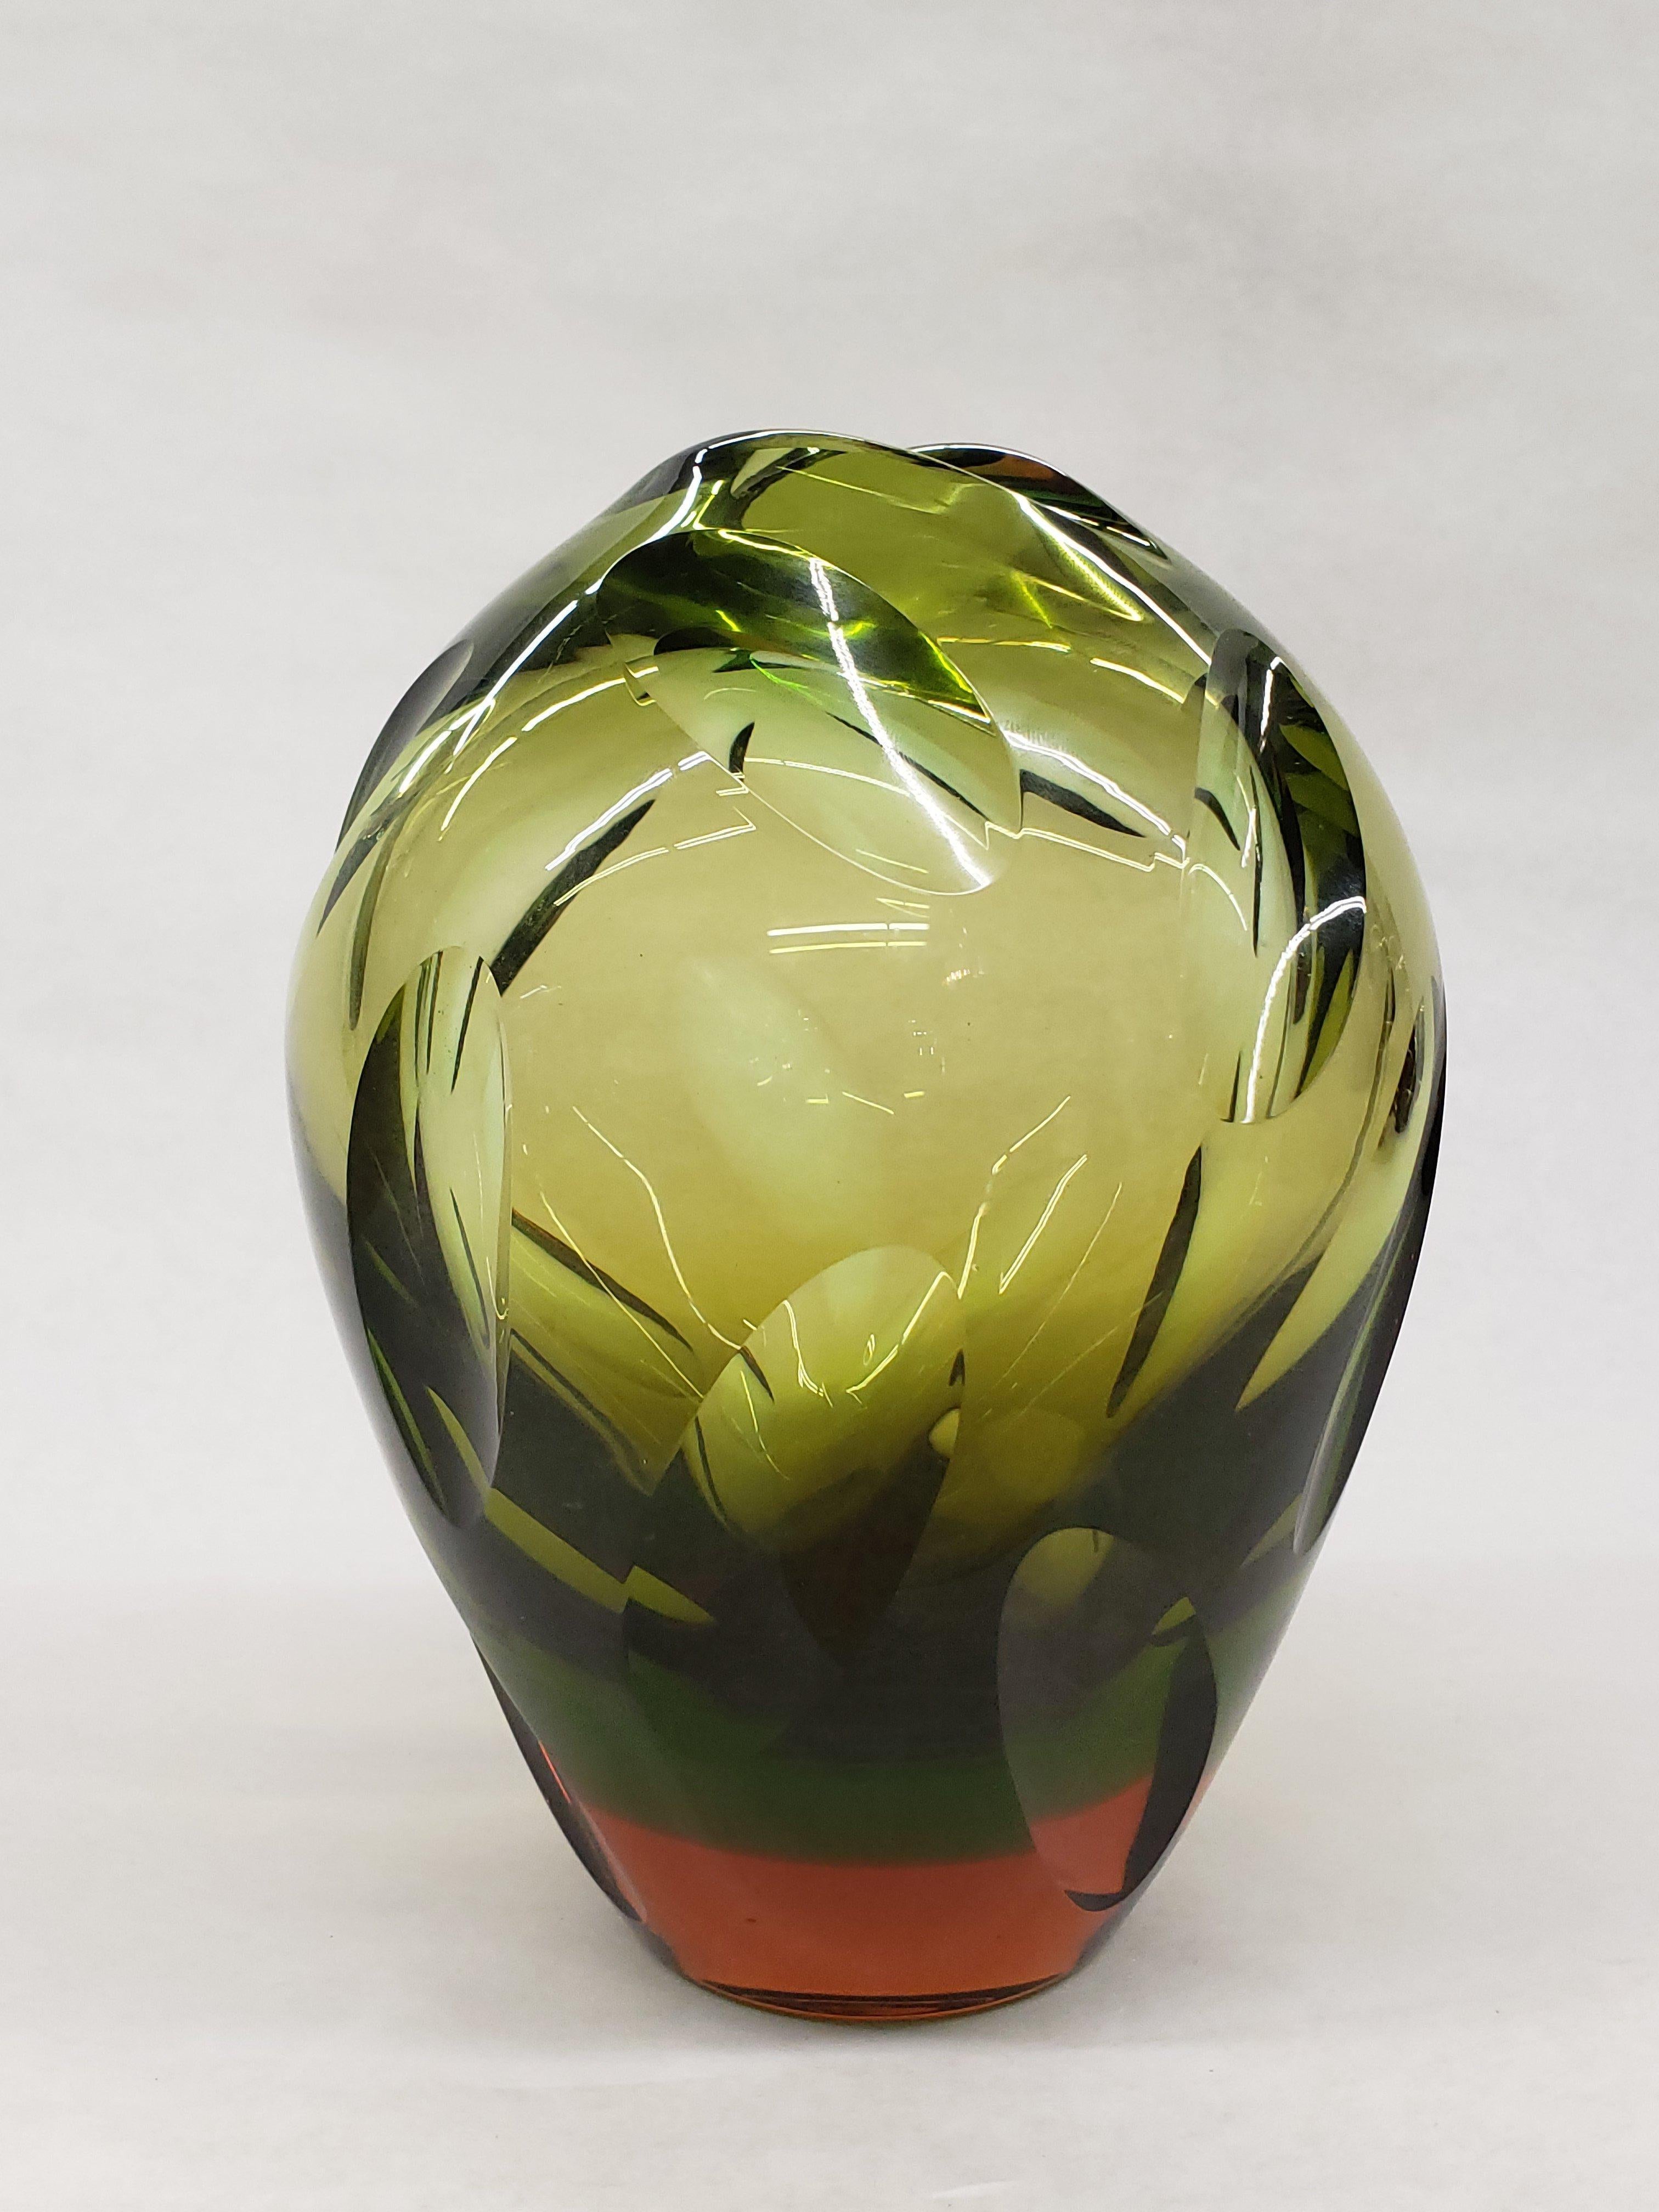 Stunning 1960s Sommerso vase with cut and polished indentations in the vase. A stunning display of cased glass artistry by Flavio Poli.